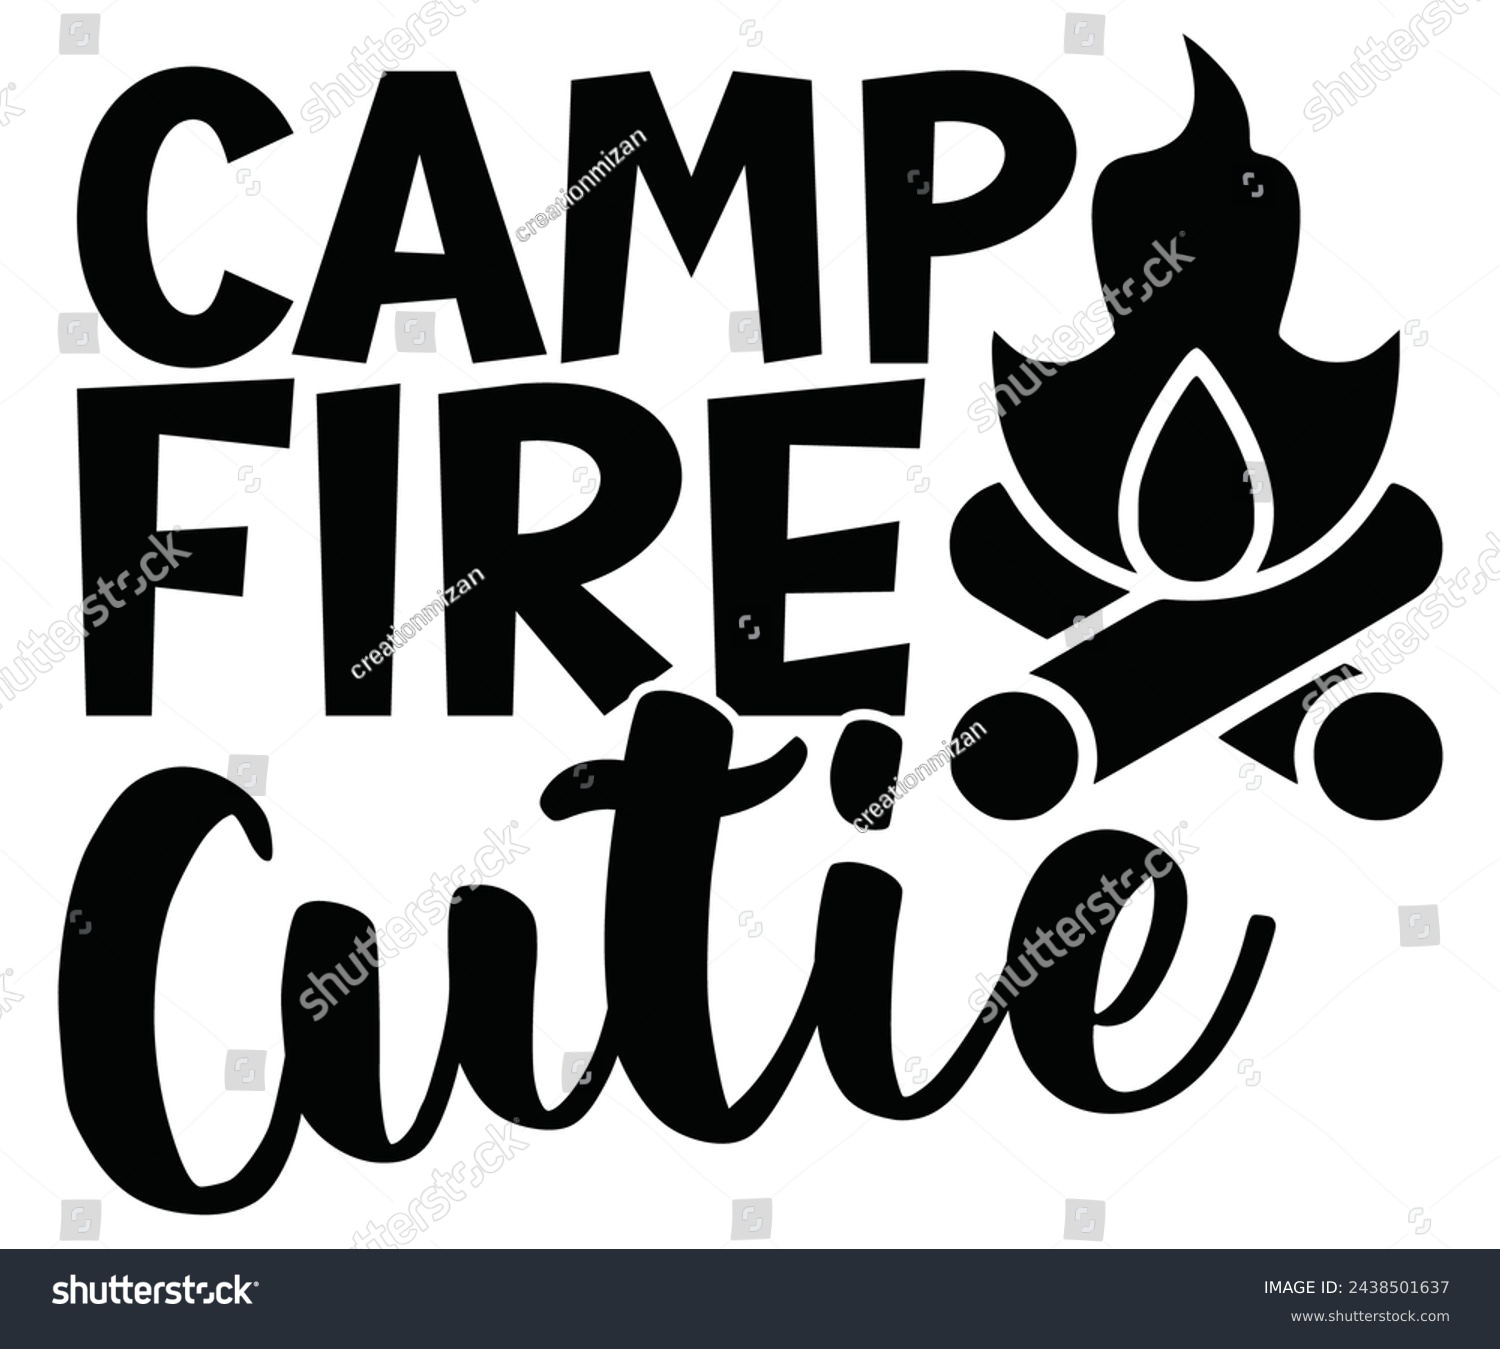 SVG of camp fire cutie Svg,Camping Svg,Hiking,Funny Camping,Adventure,Summer Camp,Happy Camper,Camp Life,Camp Saying,Camping Shirt svg